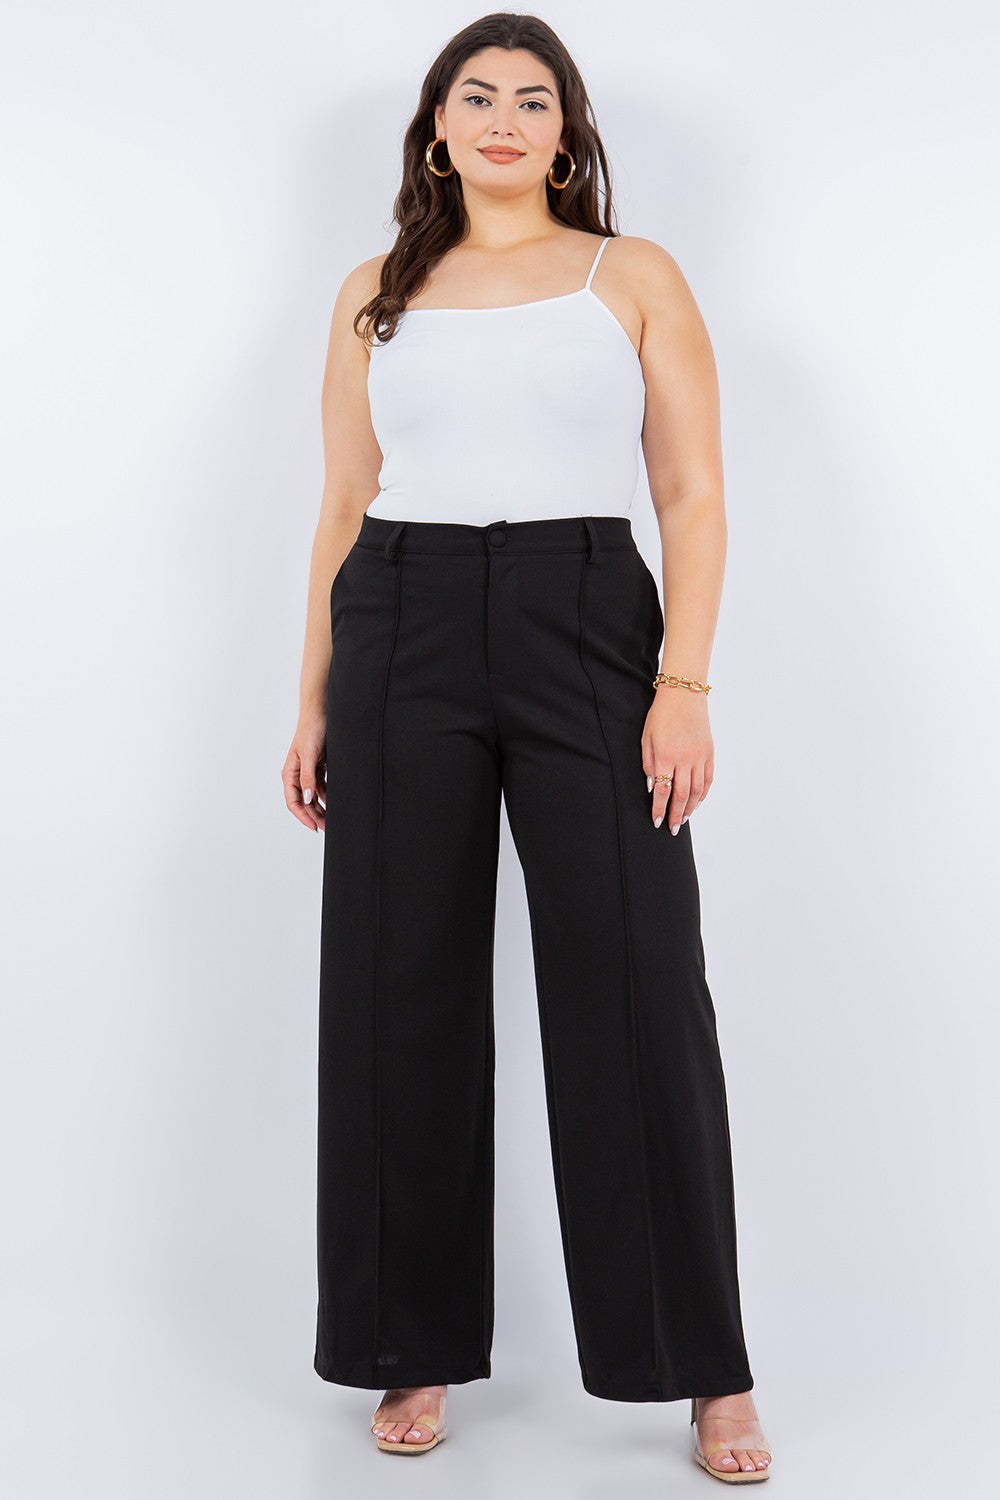 New Hot Fashion Plus Size Straight Black Maternity Trousers For Women  Perfect For Office, Work And Business Wear LJ201103 From Luo04, $28.49